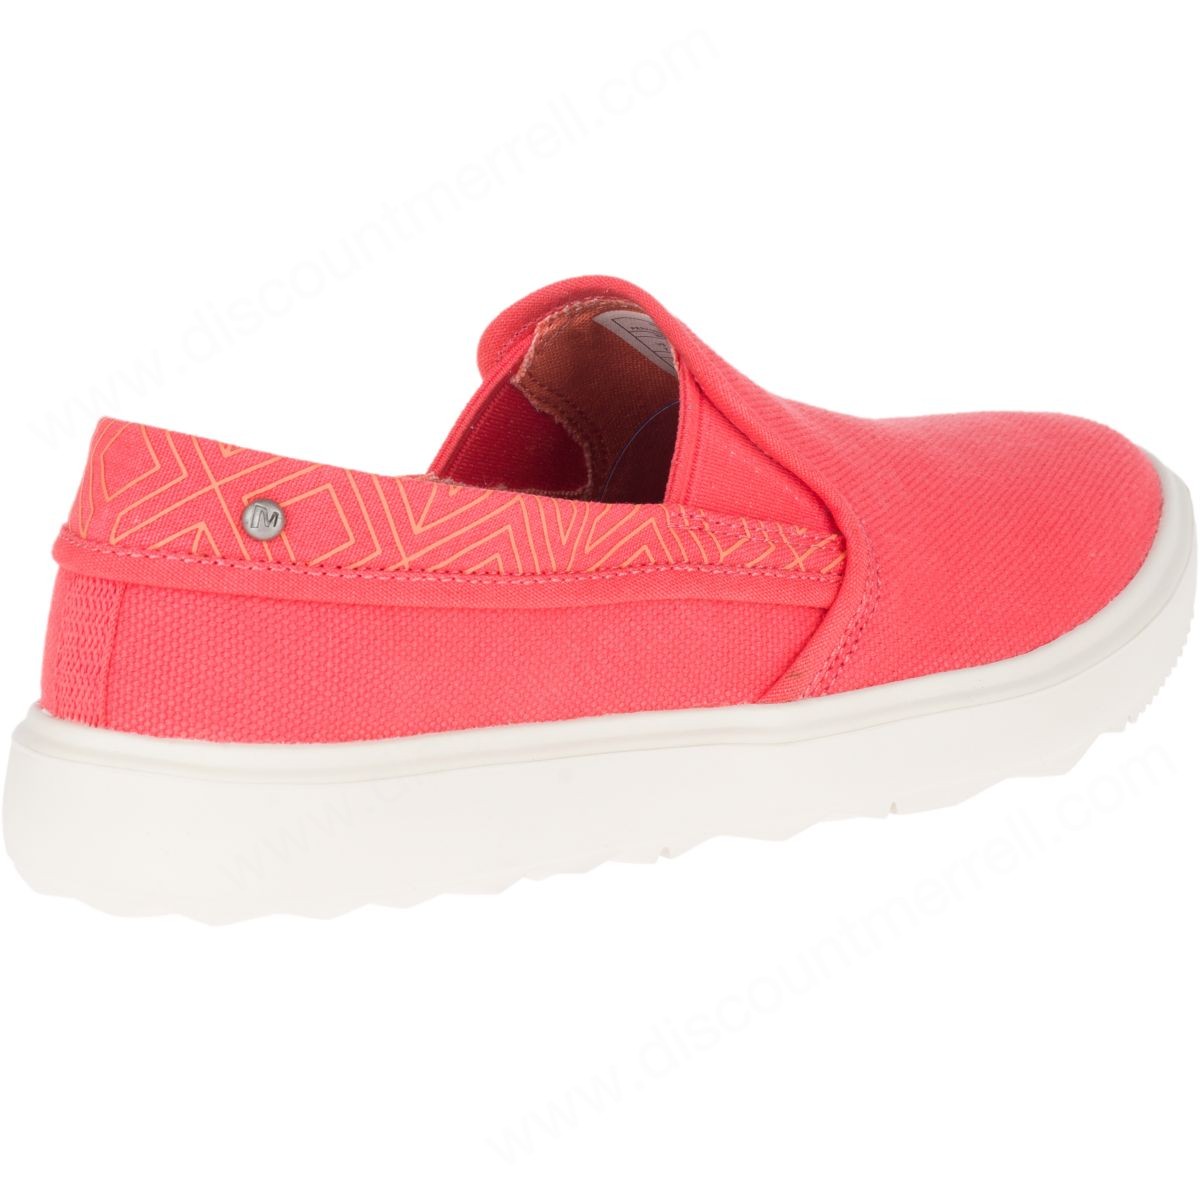 Merrell Woman's Around Town City Moc Canvas Hot Coral - -7